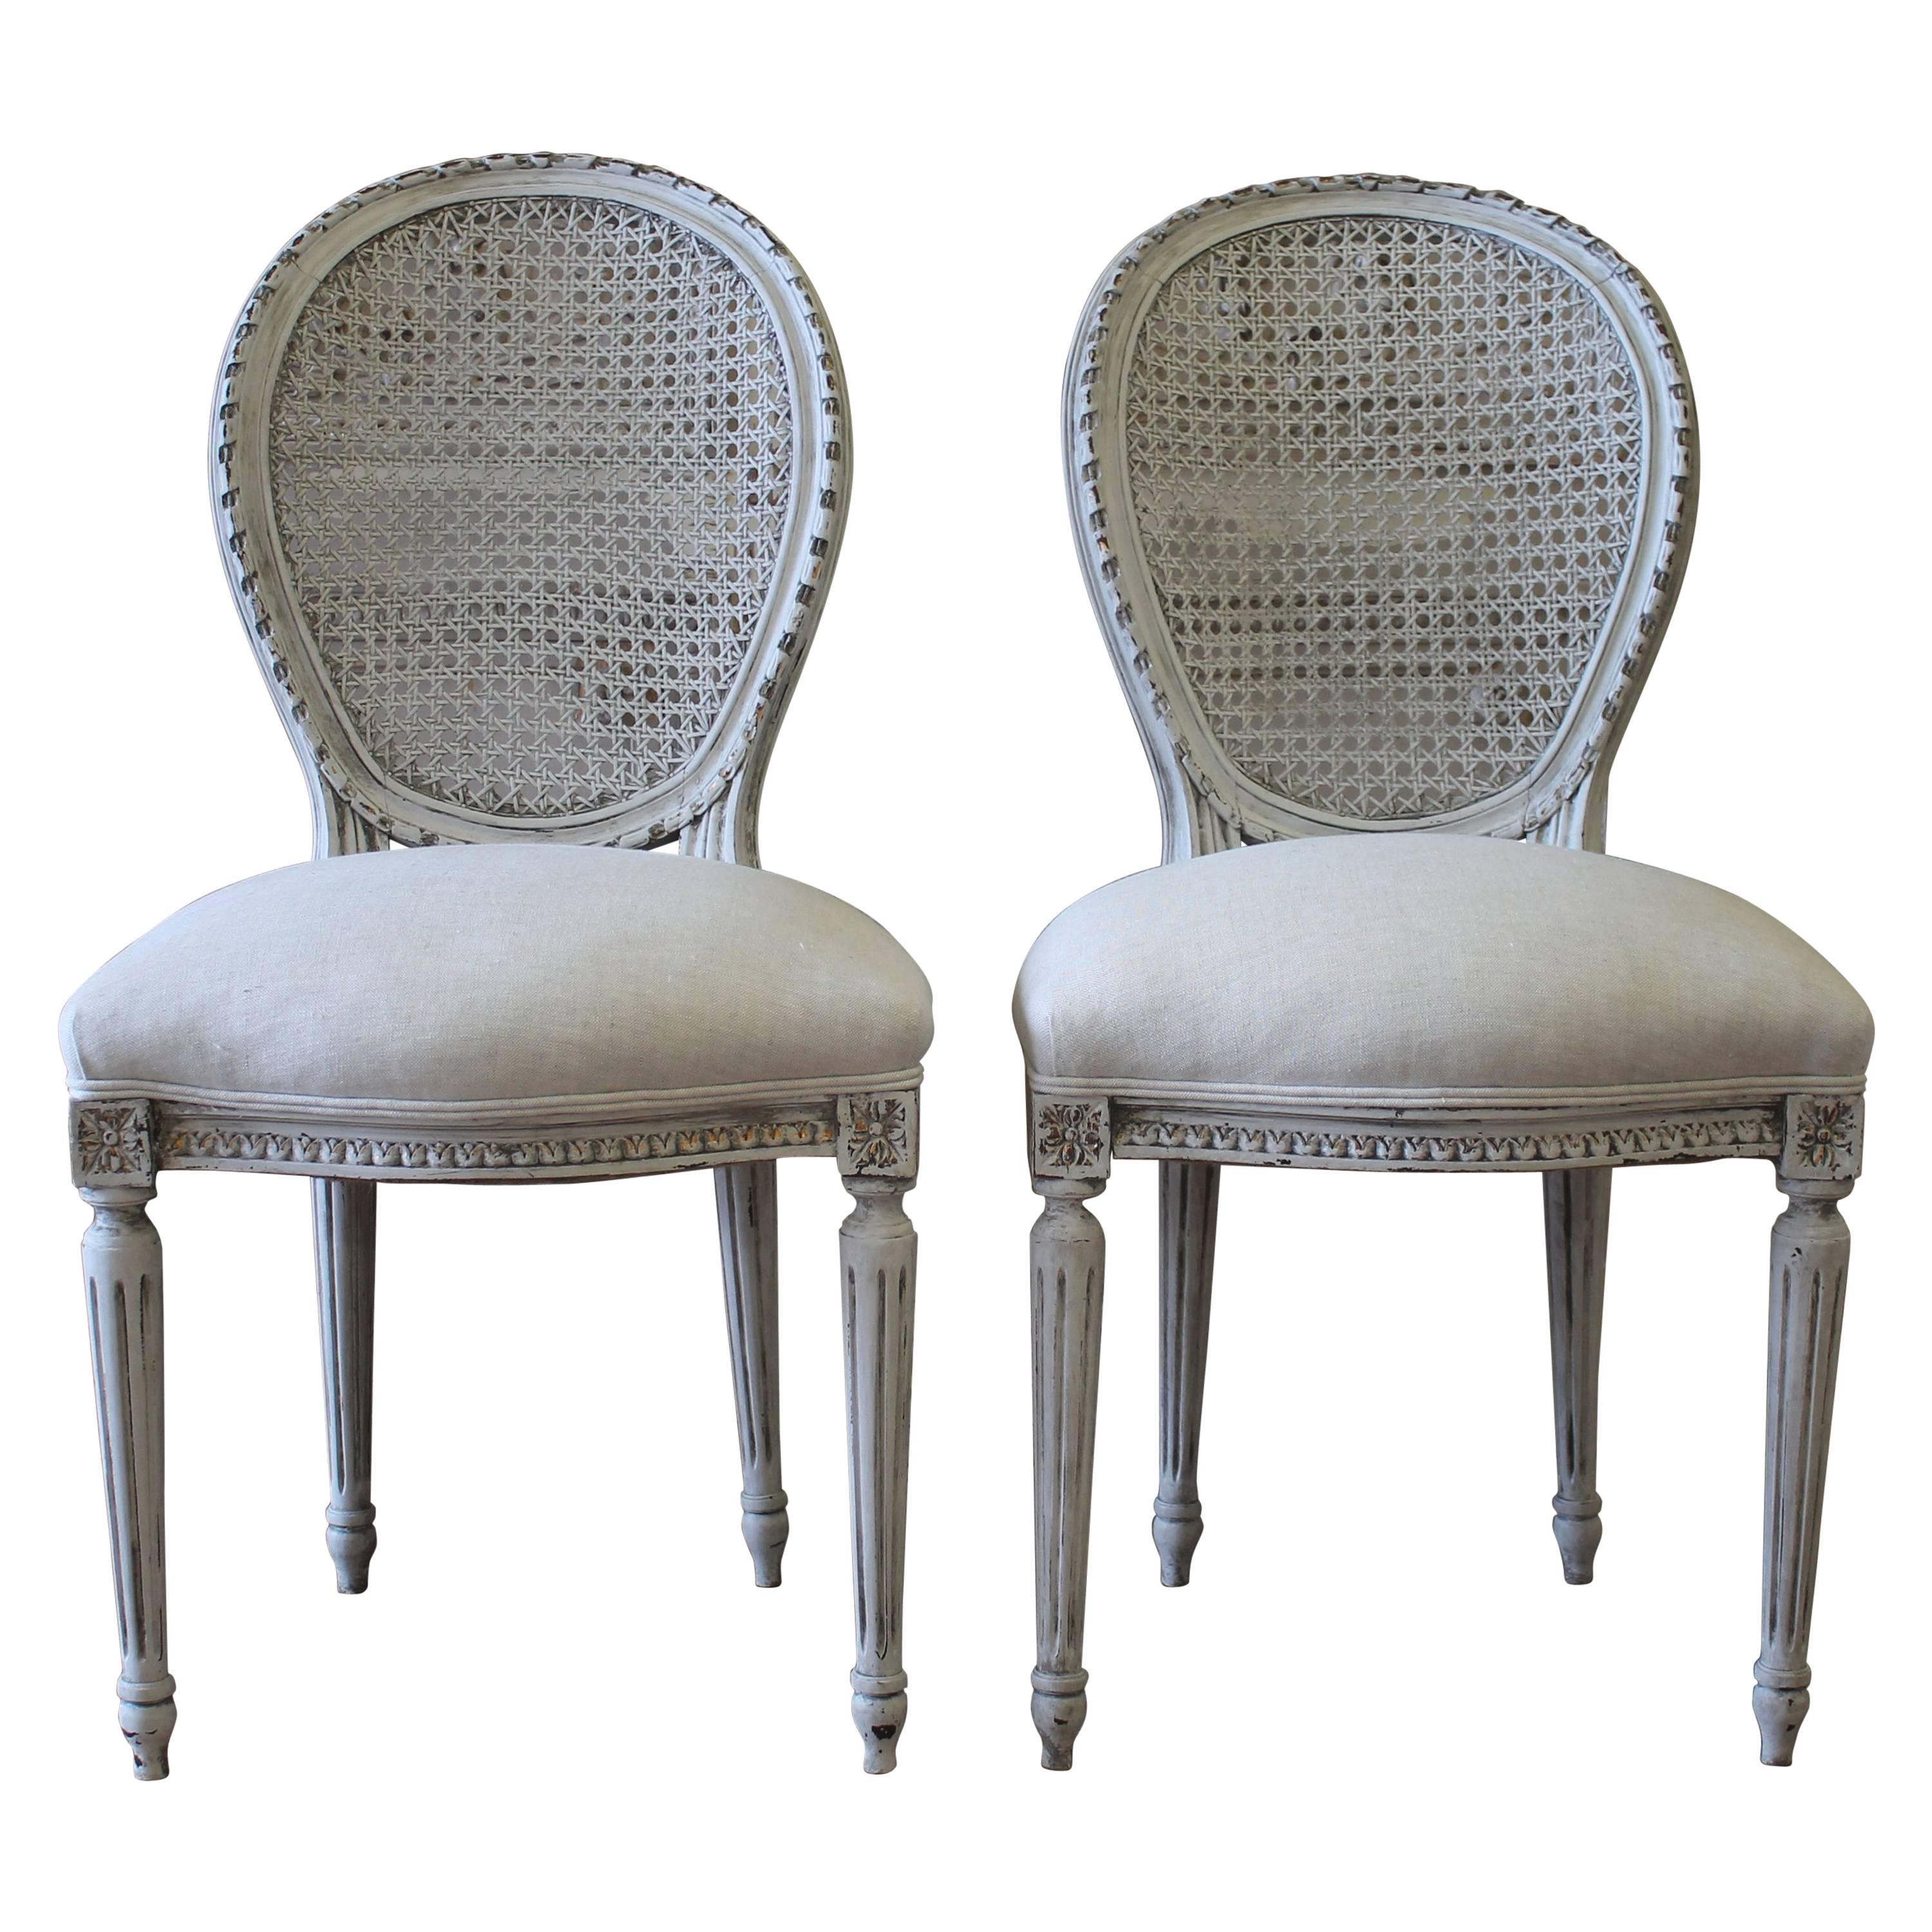 Pair of Antique French Louis XVI Style Cane Back Side Chairs